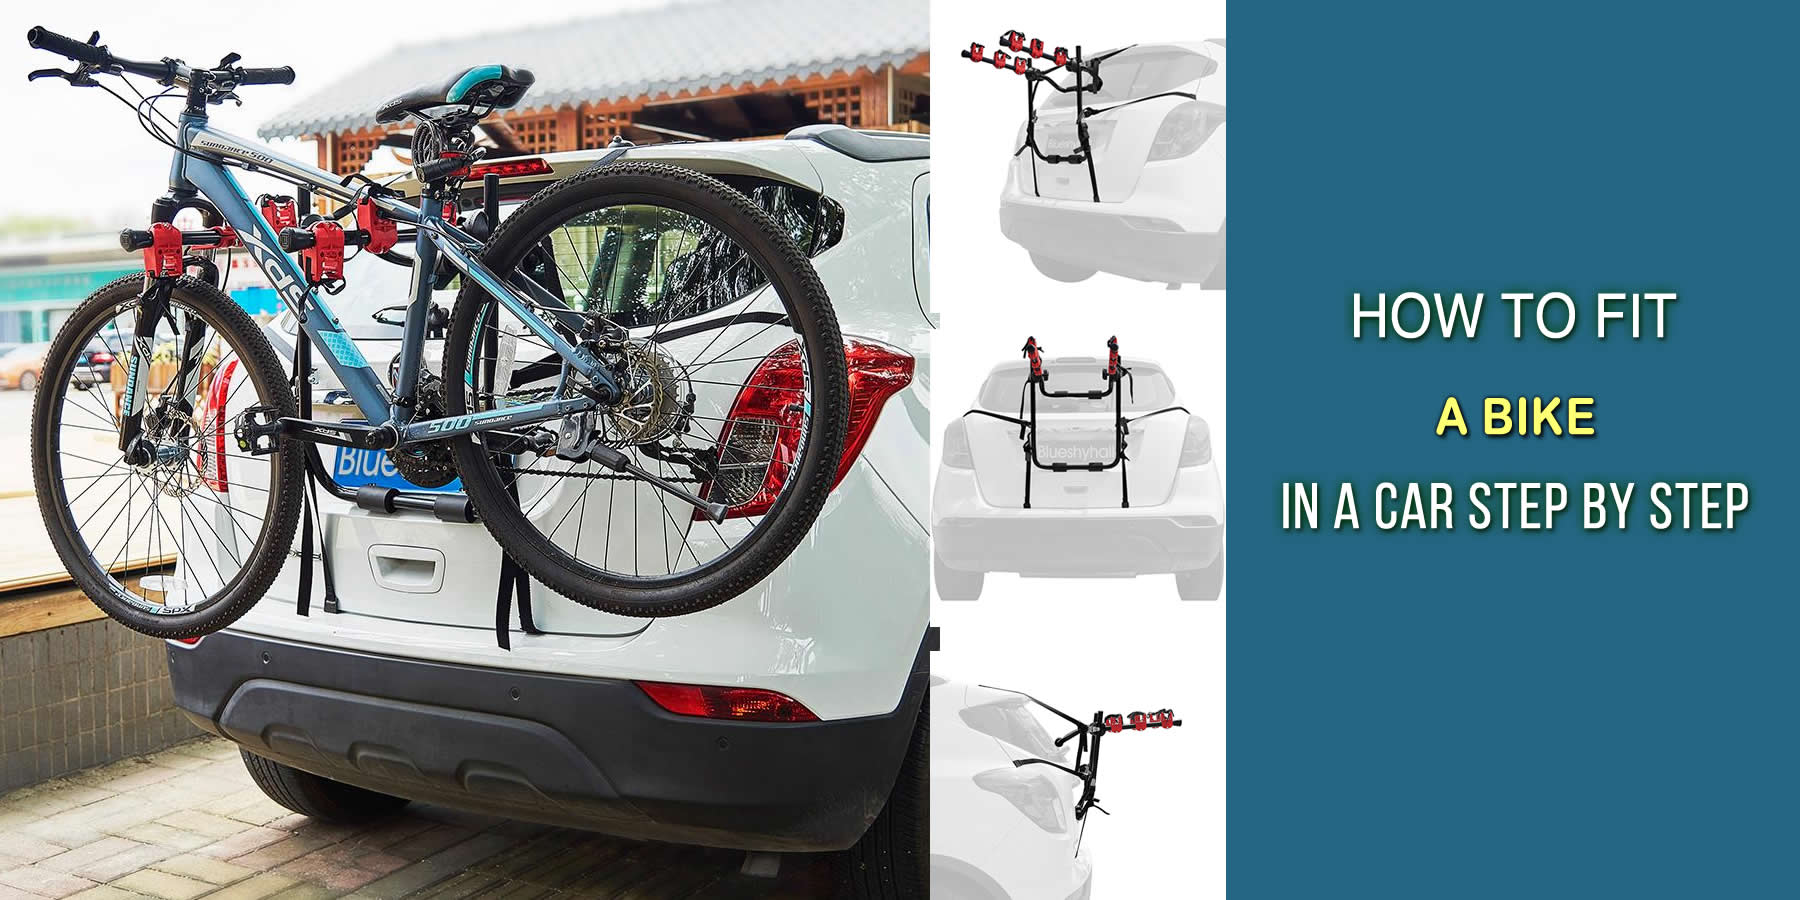 How To Fit A Bike In A Car: Step By Step